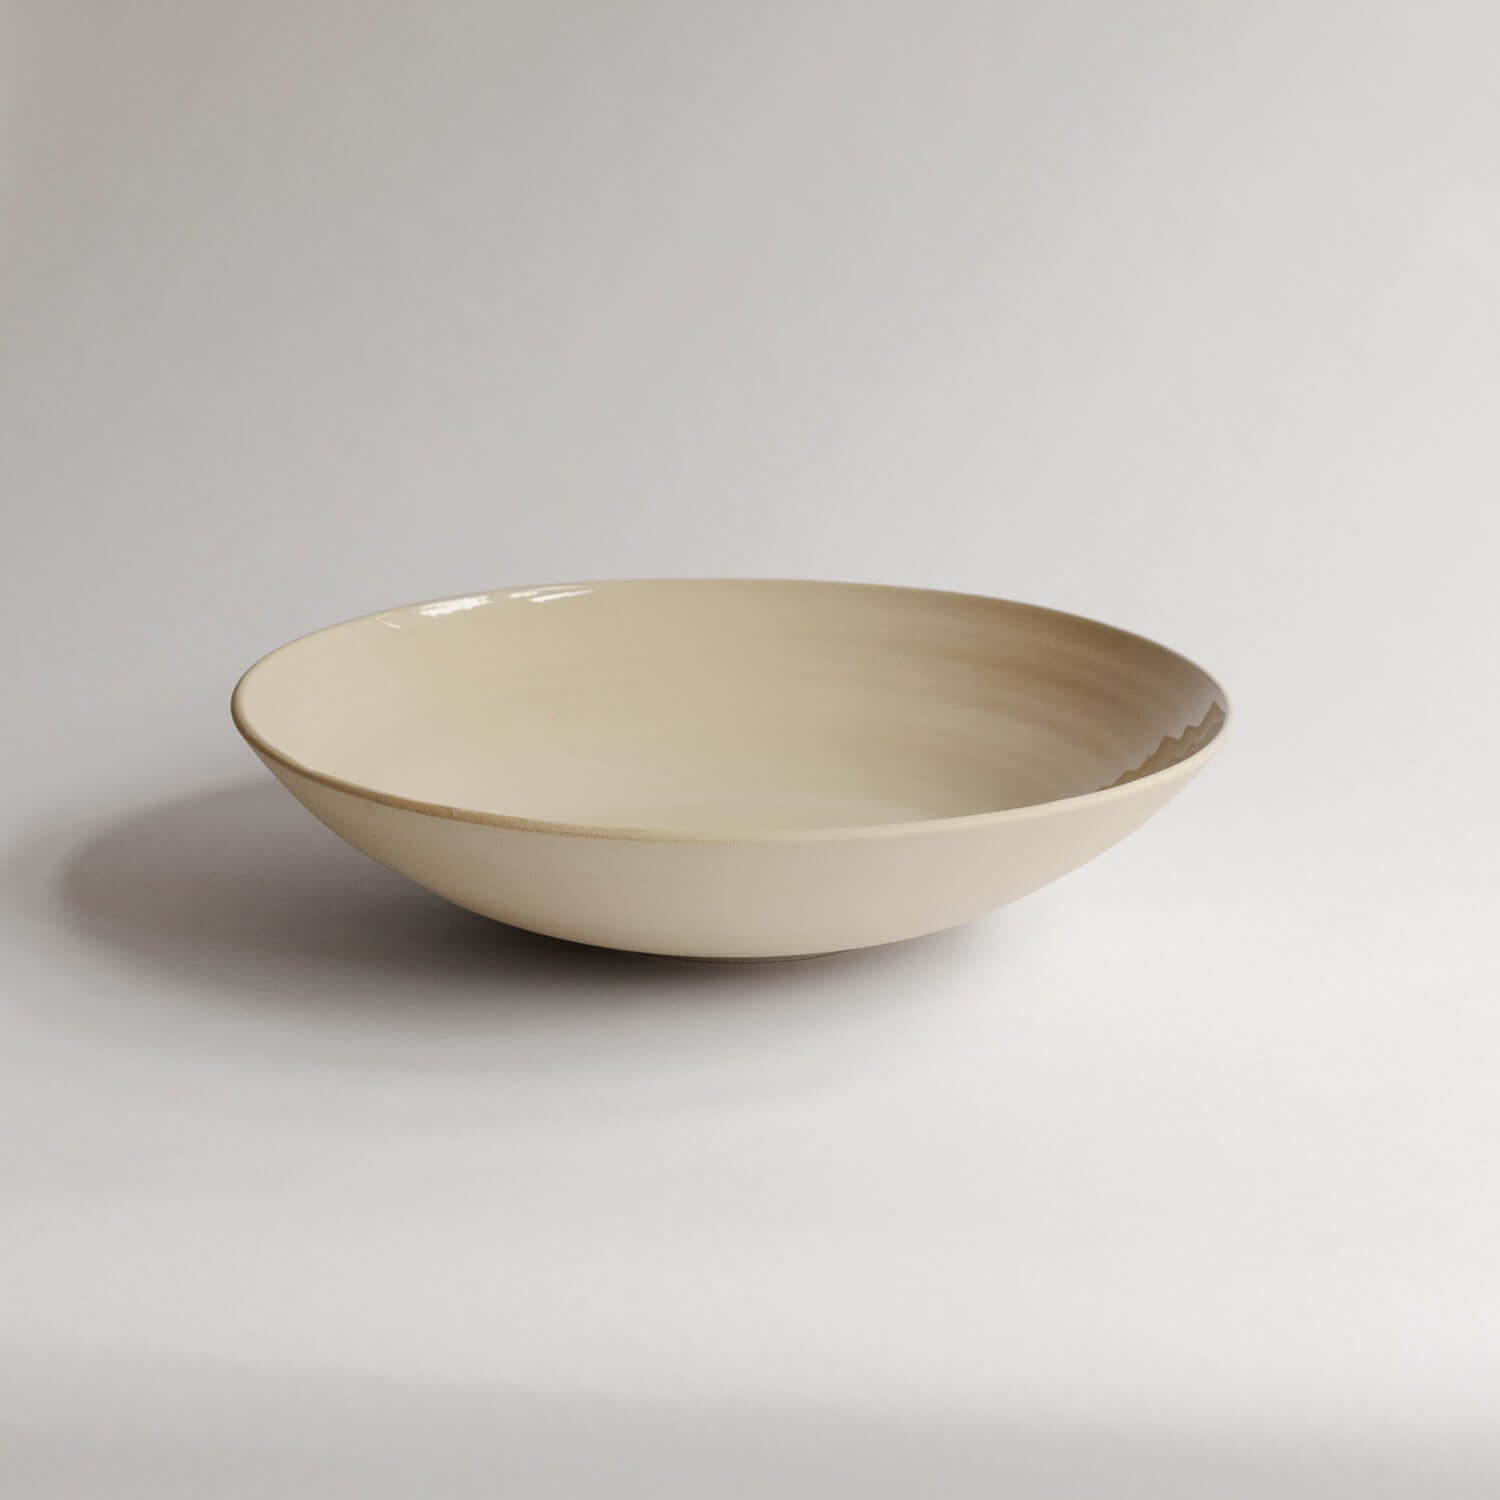 Unique 30 cm big bowl, perfect for salads or fruits. Handcrafted from grey stoneware with a food-safe glaze. Add artisan charm to your table! von viola beuscher ceramics